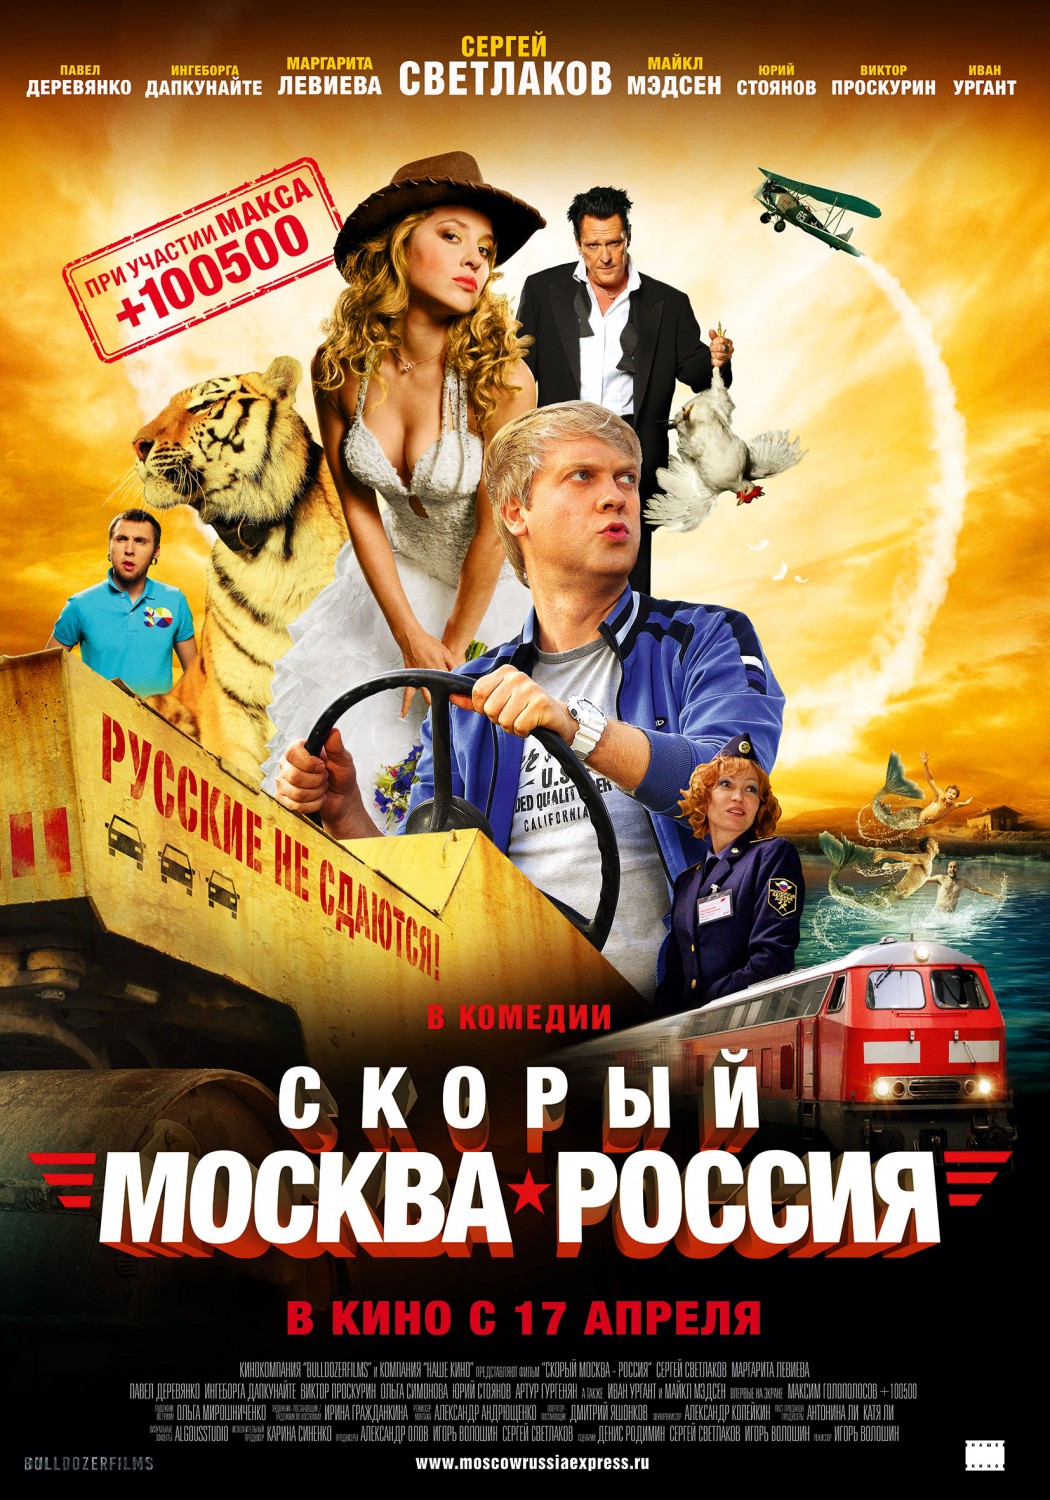 Extra Large Movie Poster Image for Moscow-Russia Express 